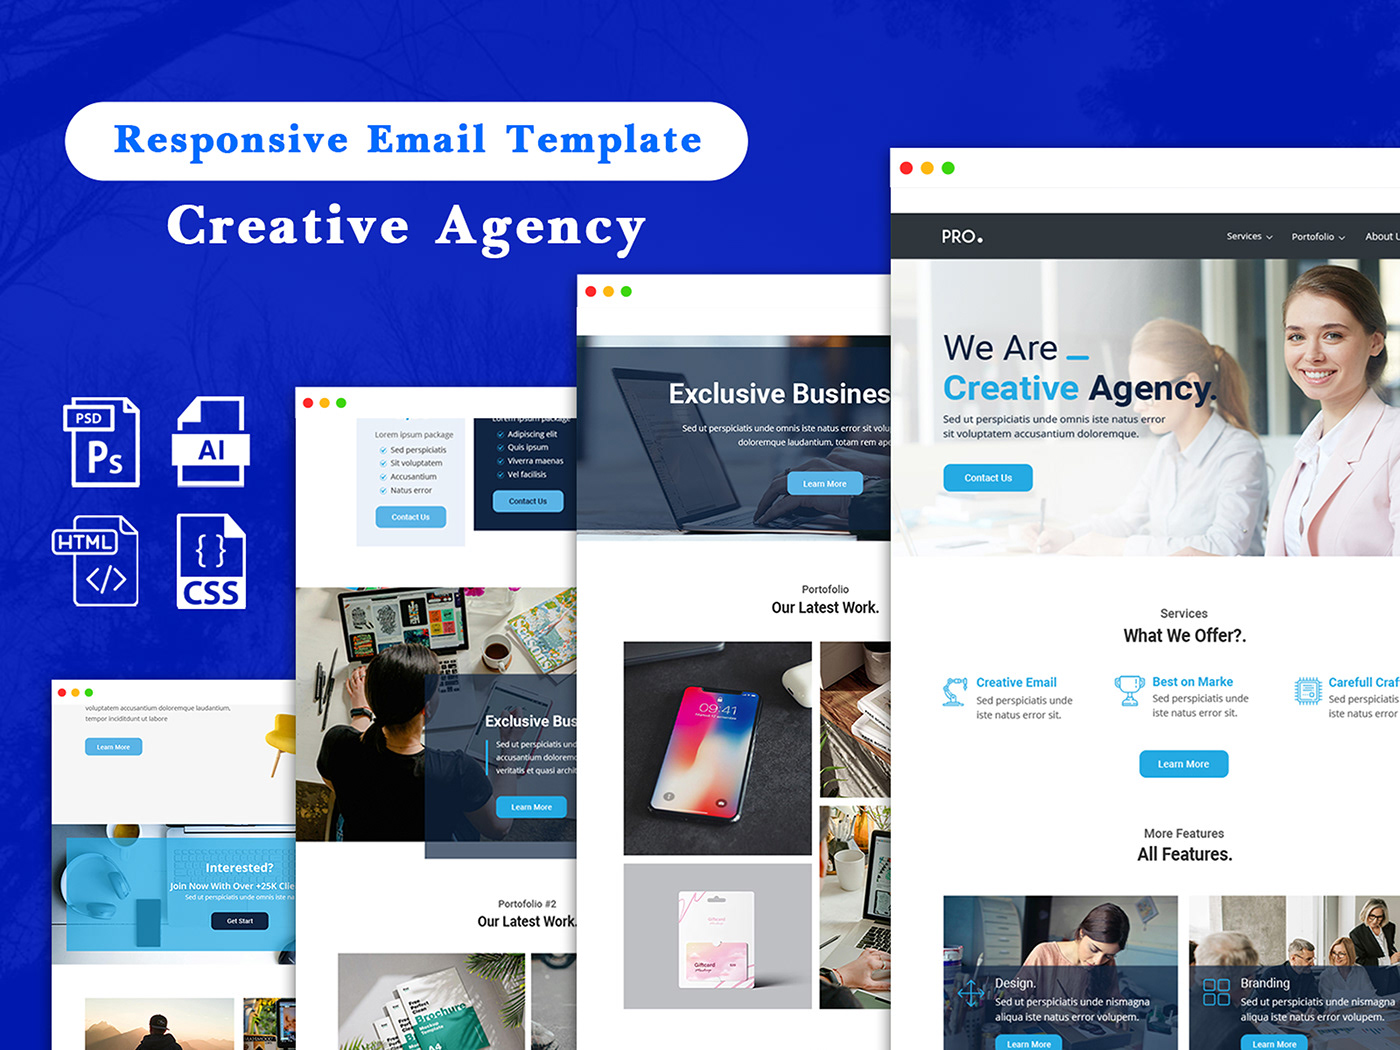 Creative Agency Email Template Design & Develop
